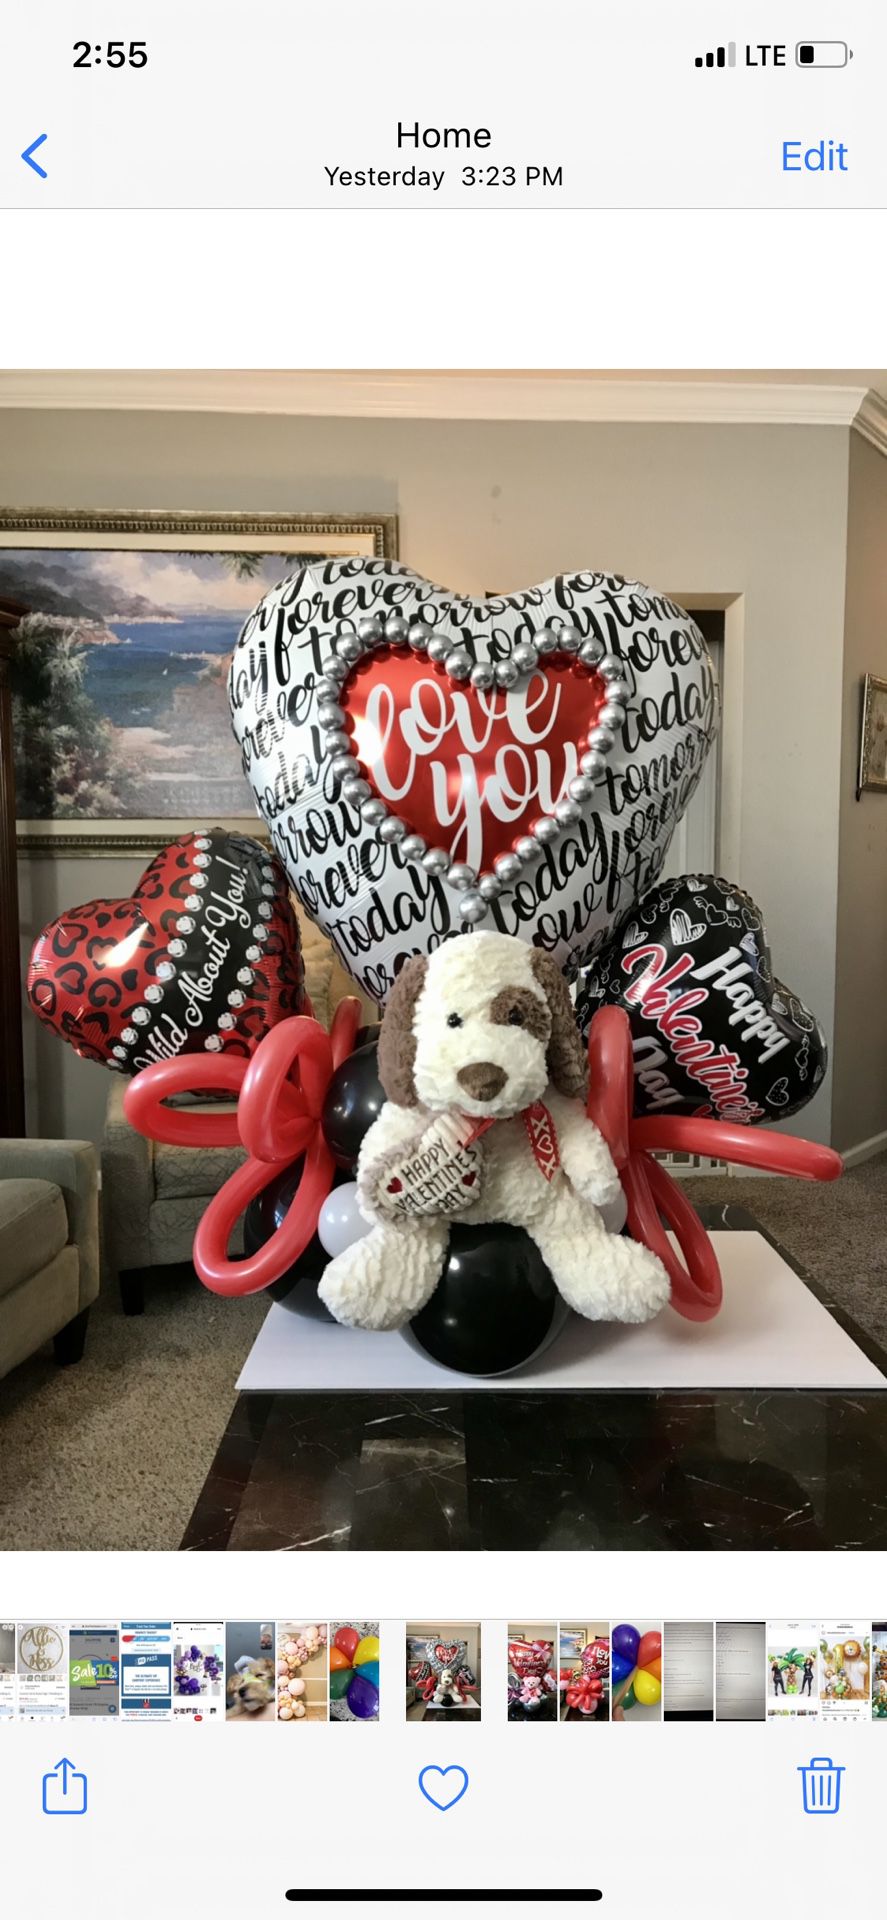 Balloon Bouquets For Valentines Starting Price $65